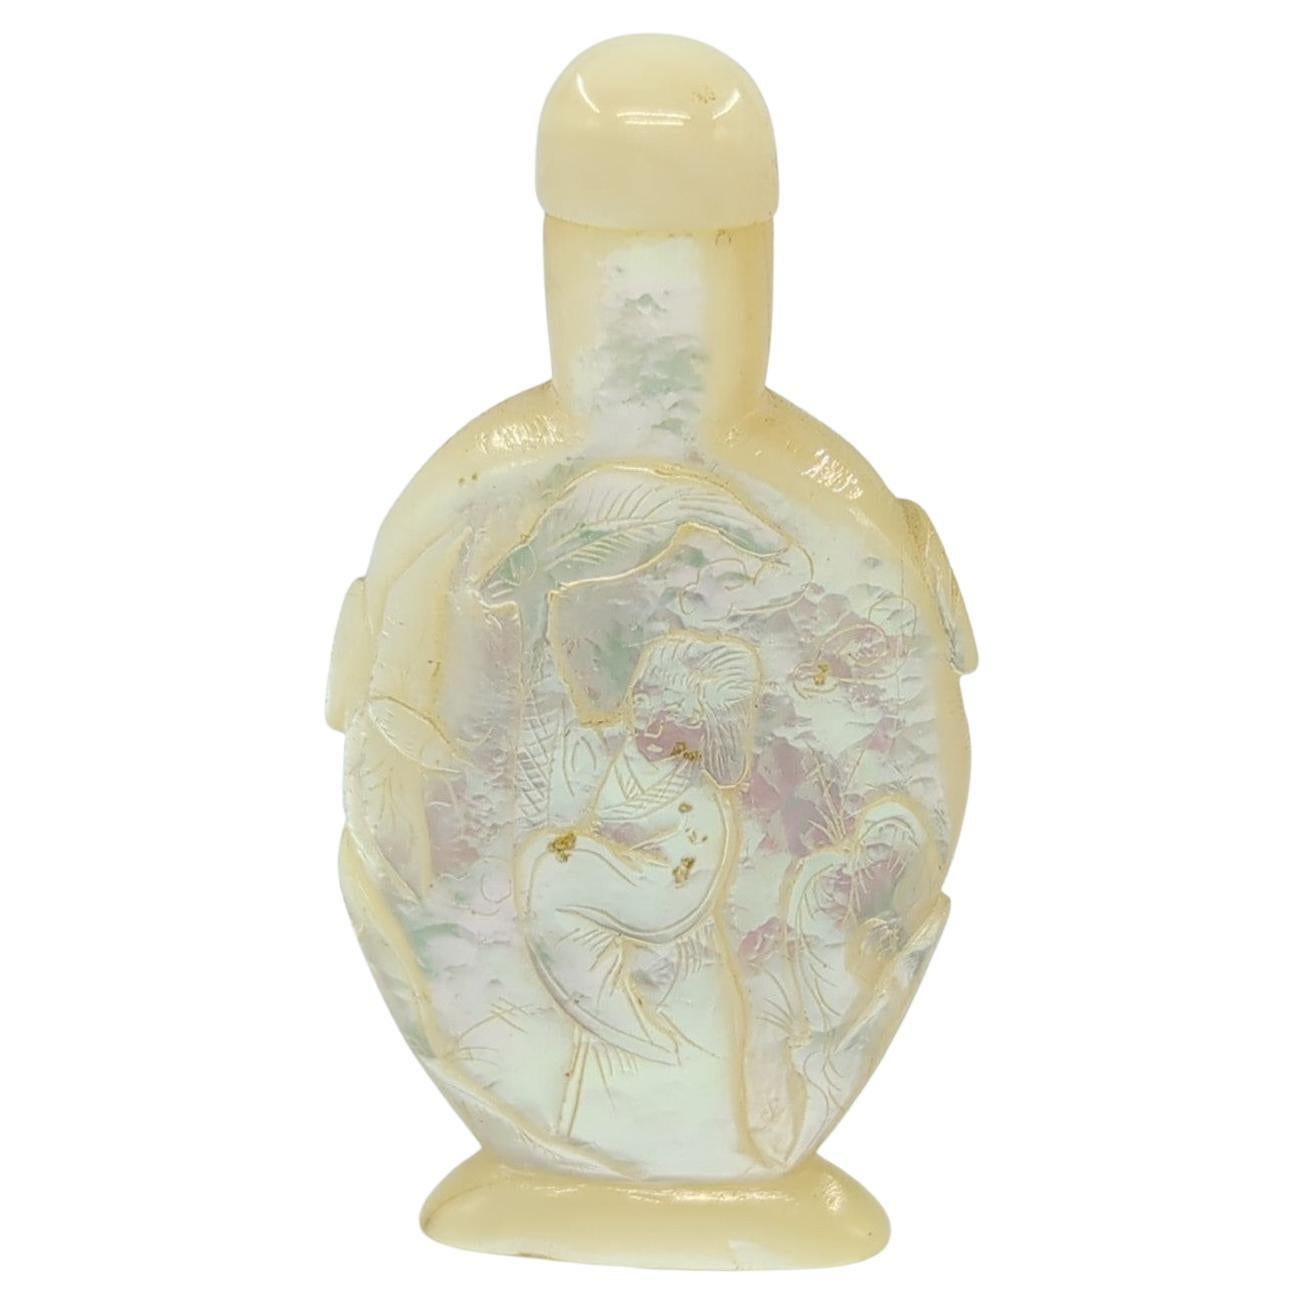 This vintage Chinese snuff bottle, exquisitely crafted from mother of pearl (MOP), is a fine example of cameo carving, a technique that creates raised relief images by carving into the layers of the material. The bottle features incised details that